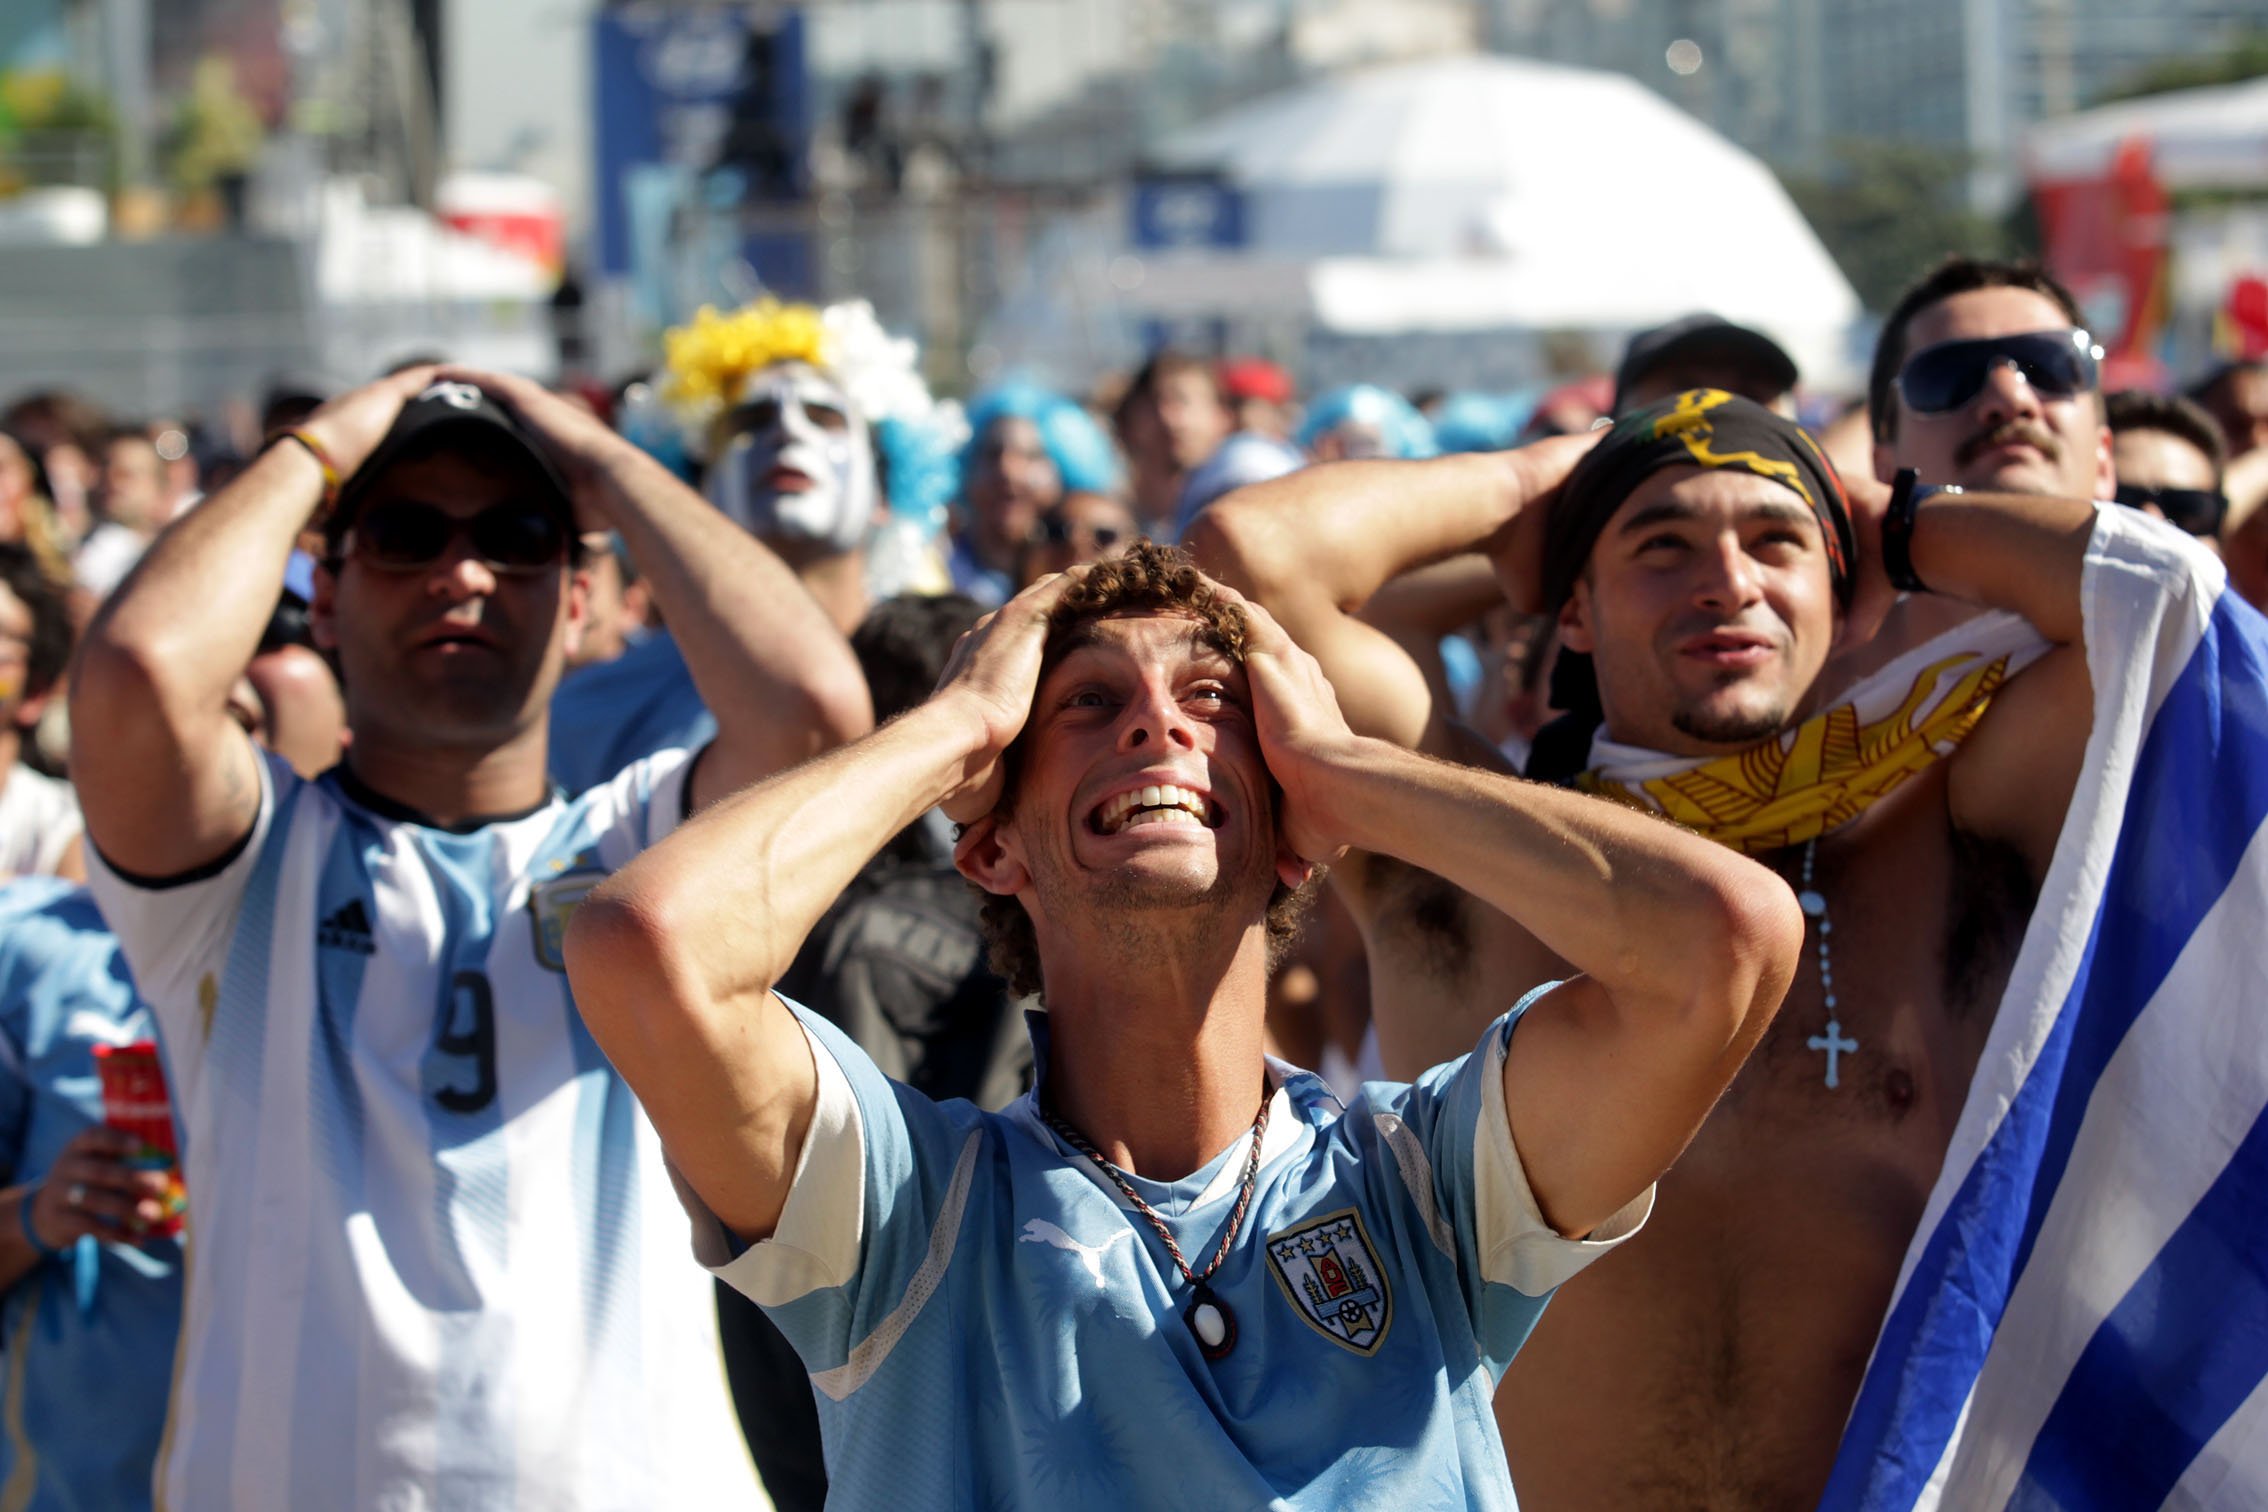 Supporters of Italy and Uruguay accompanying match of the World Cup on the big screens of FIFA Fan Fest on the sands of Copacabana beach, south zone of Rio de Janeiro on June 24, 2014.